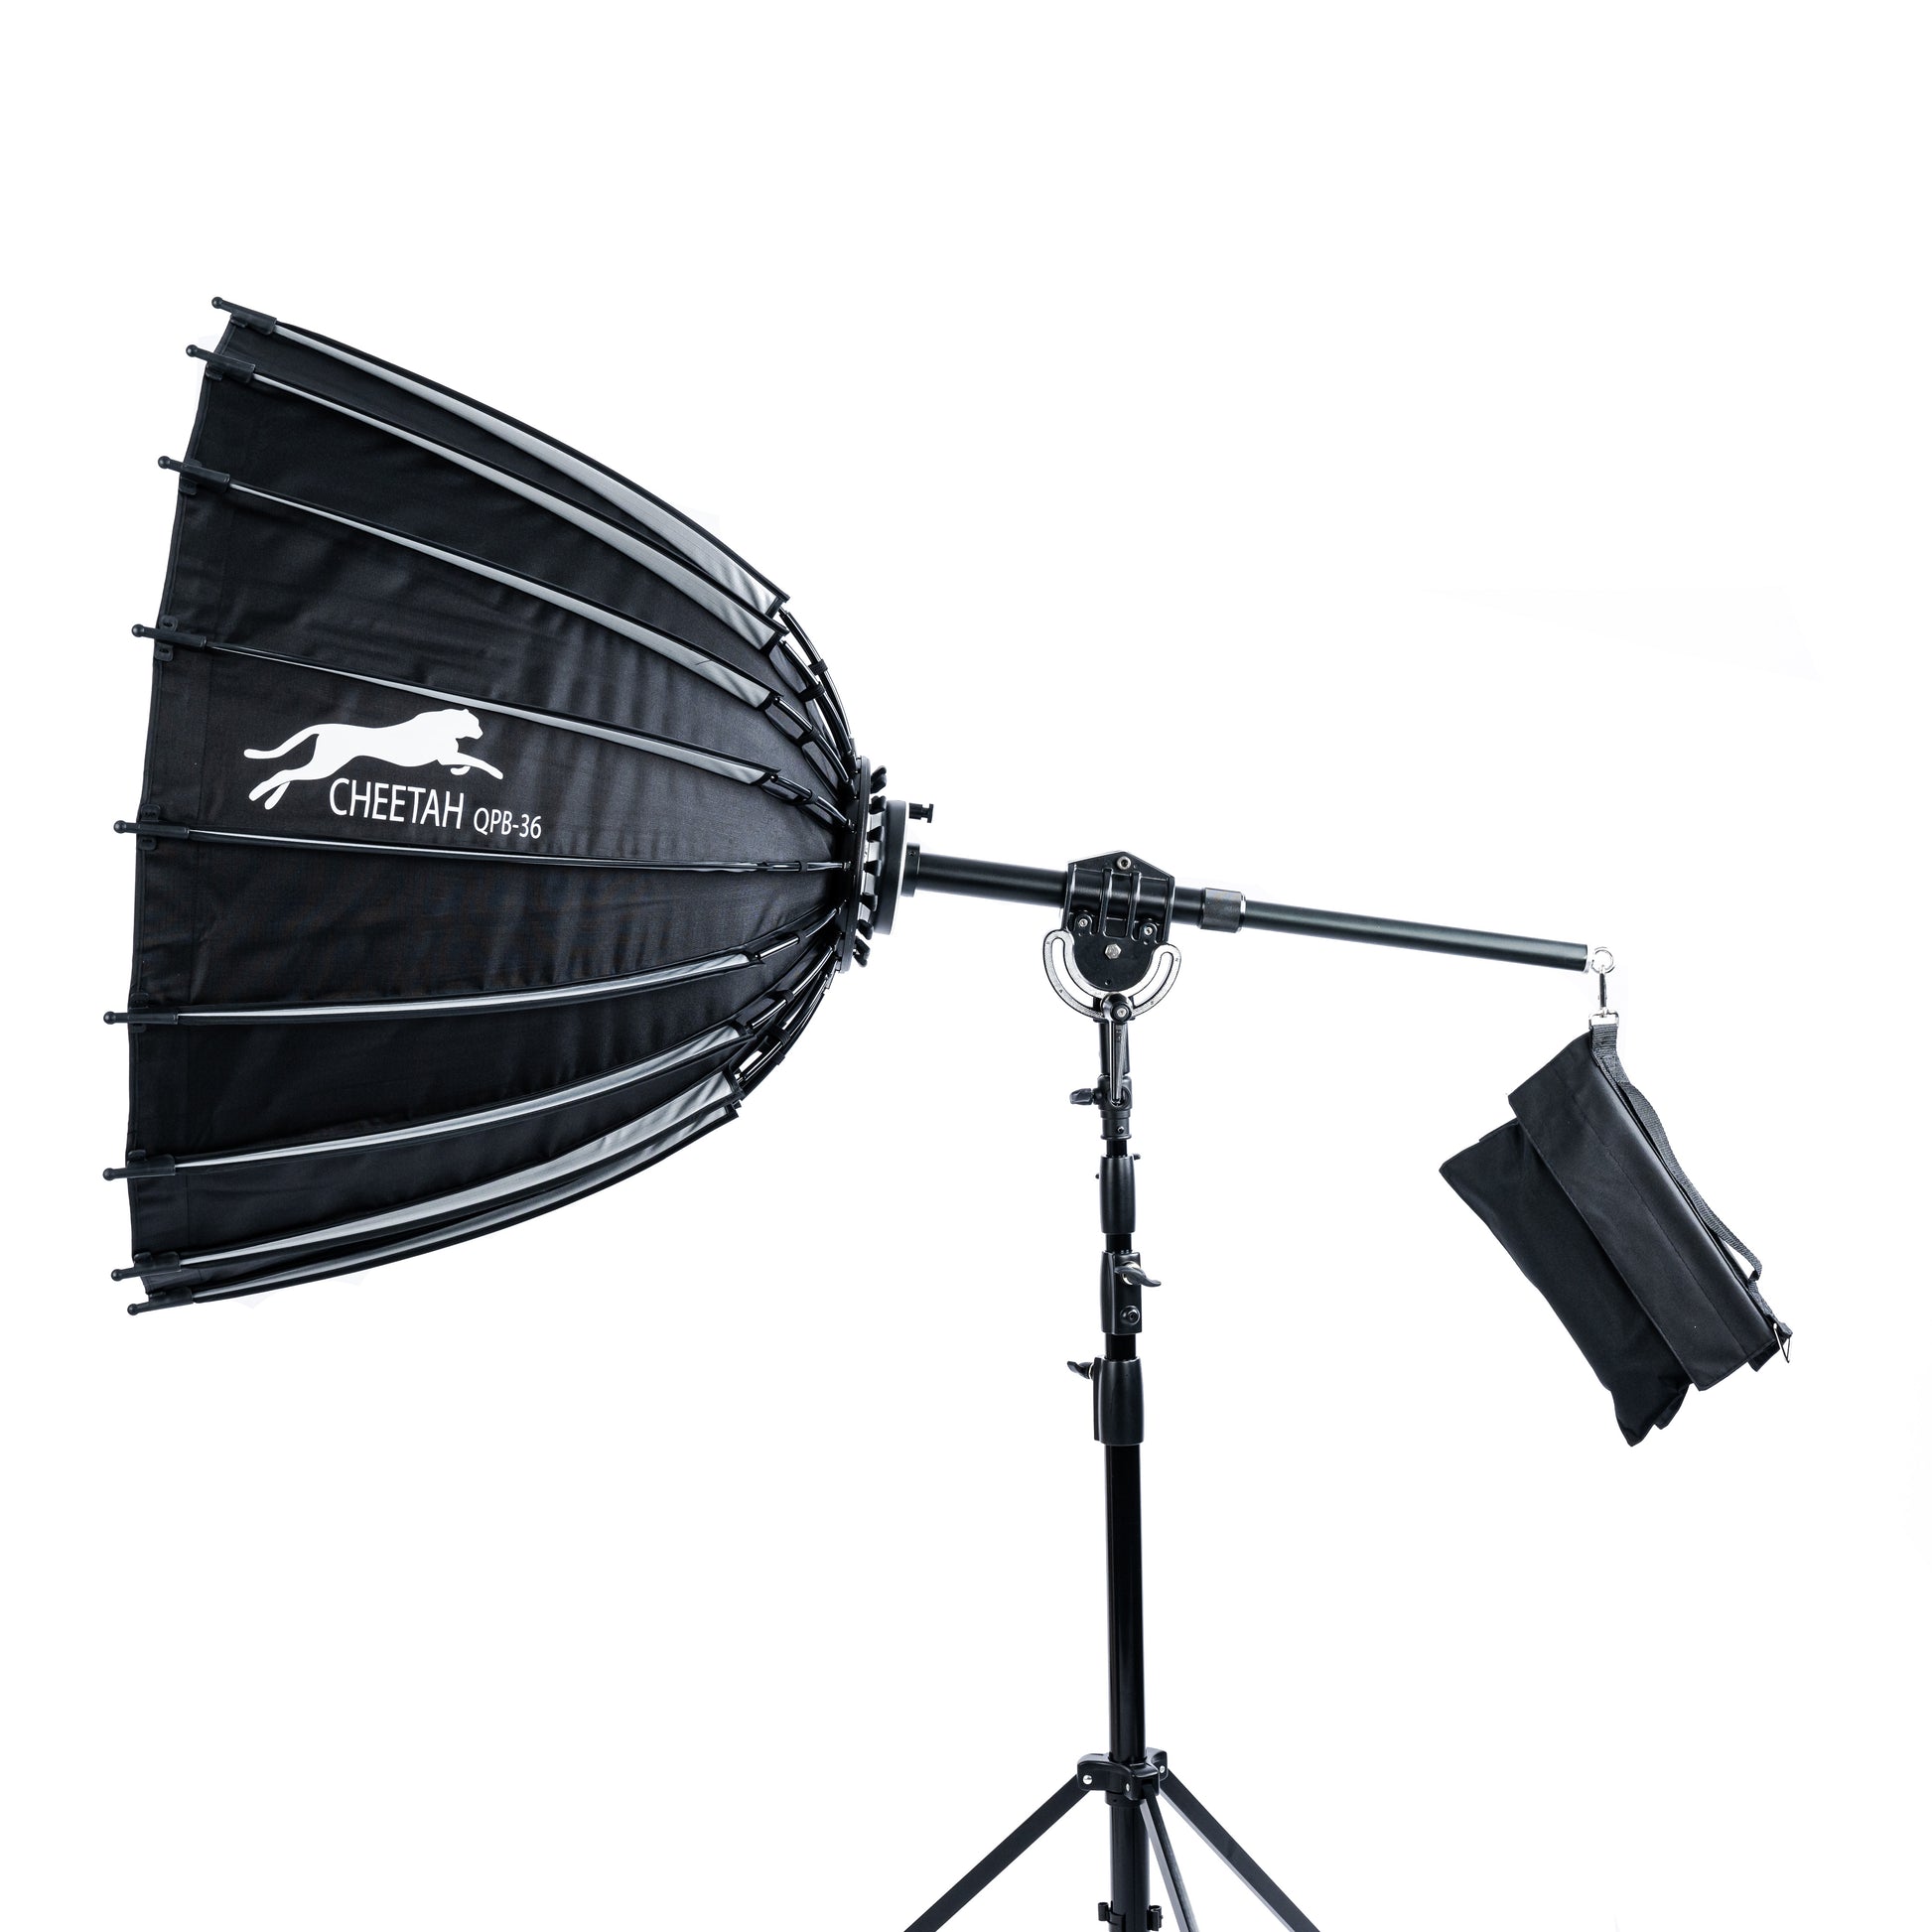 QPB-36 Softbox with Focusing System – Cheetah Stand